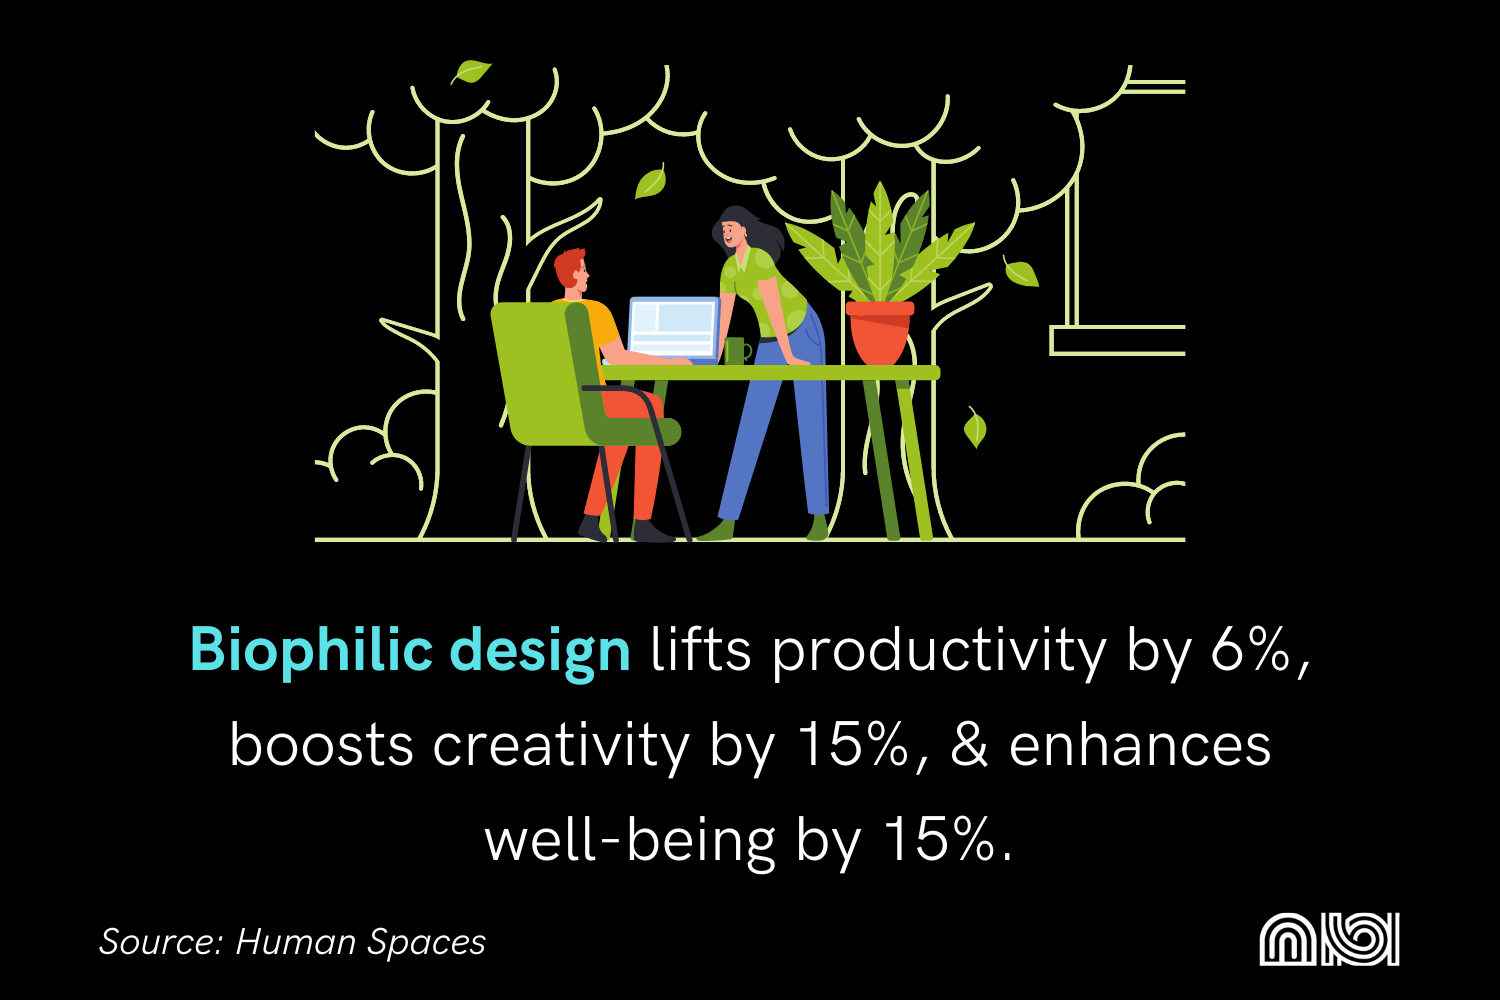 Biophilic design benefits: 6% productivity increase, 15% more creativity, and well-being enhancement. Human Spaces study.